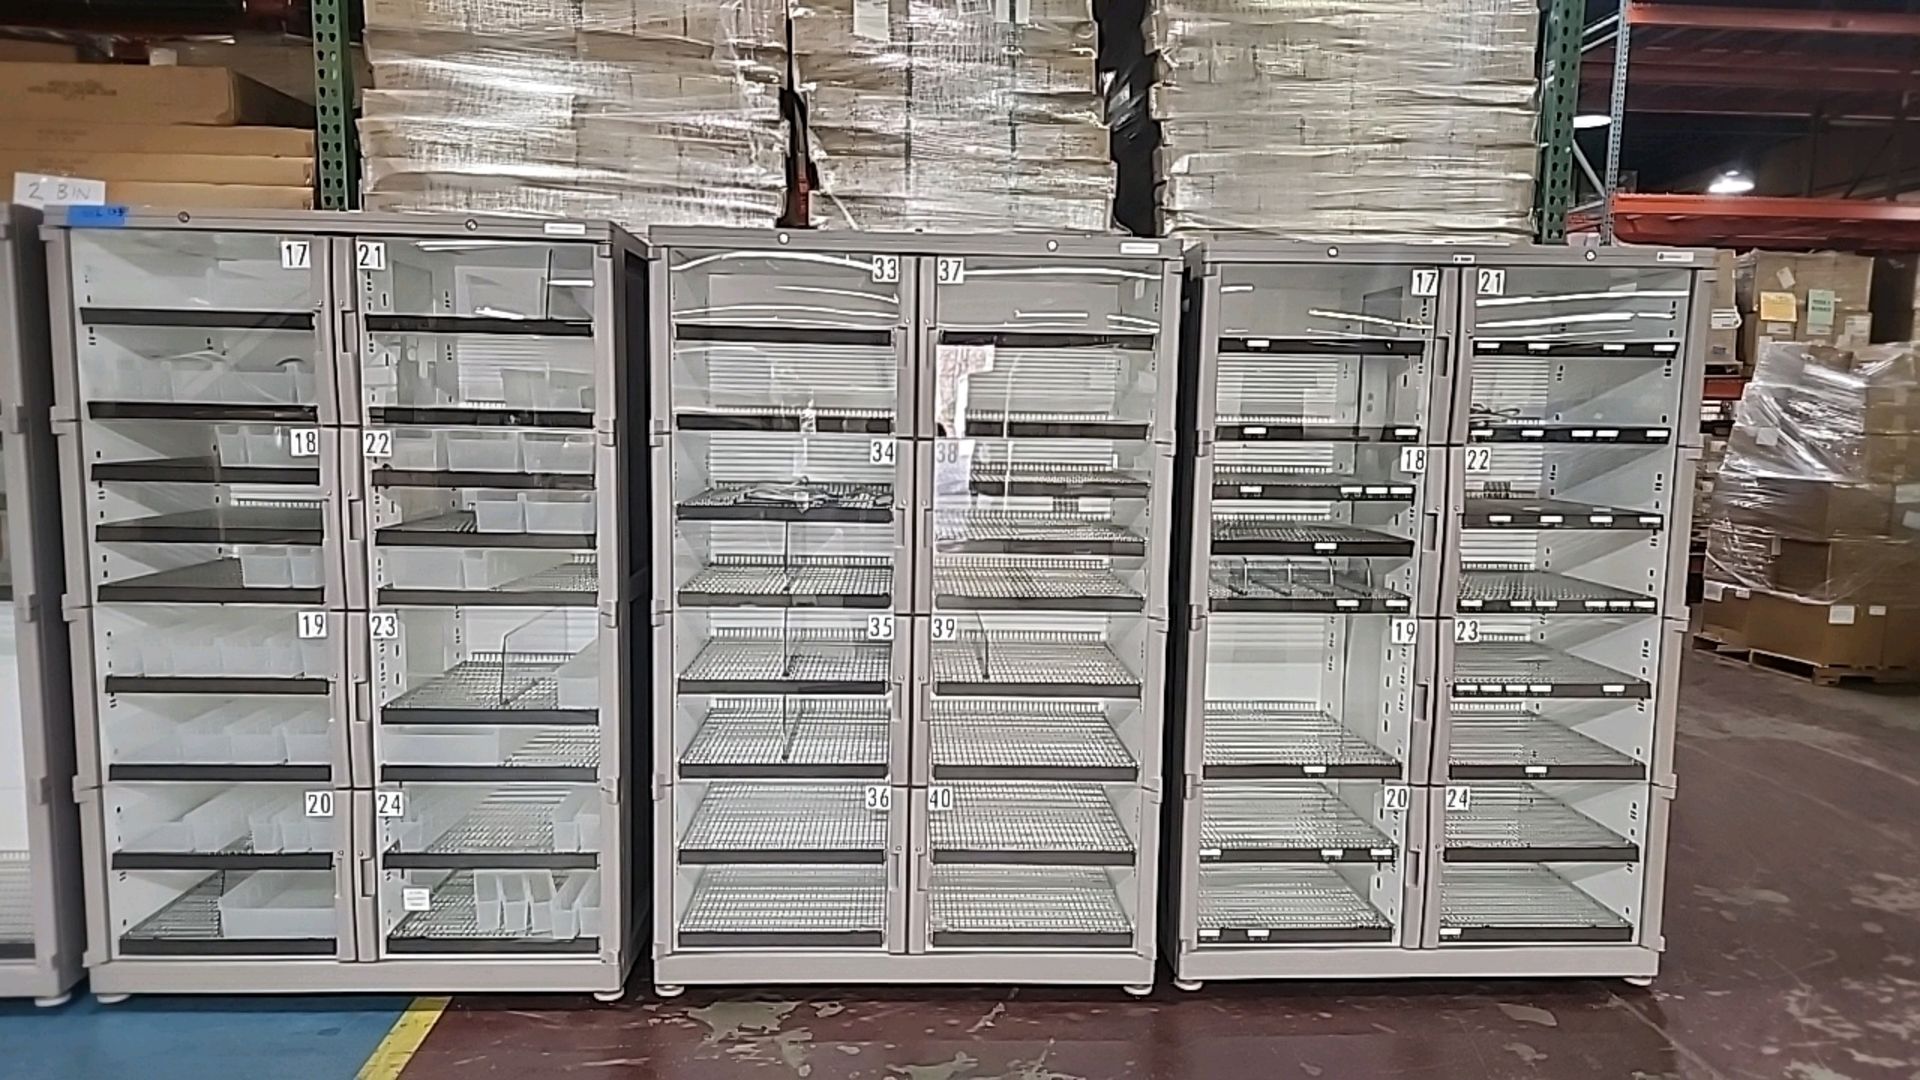 BD PYXIS 318 UNIVERSAL 601 SUPPLY CABINET, 2-DOOR, QTY(3) LOCATION: 100 GOLDEN DR. CODE: 216